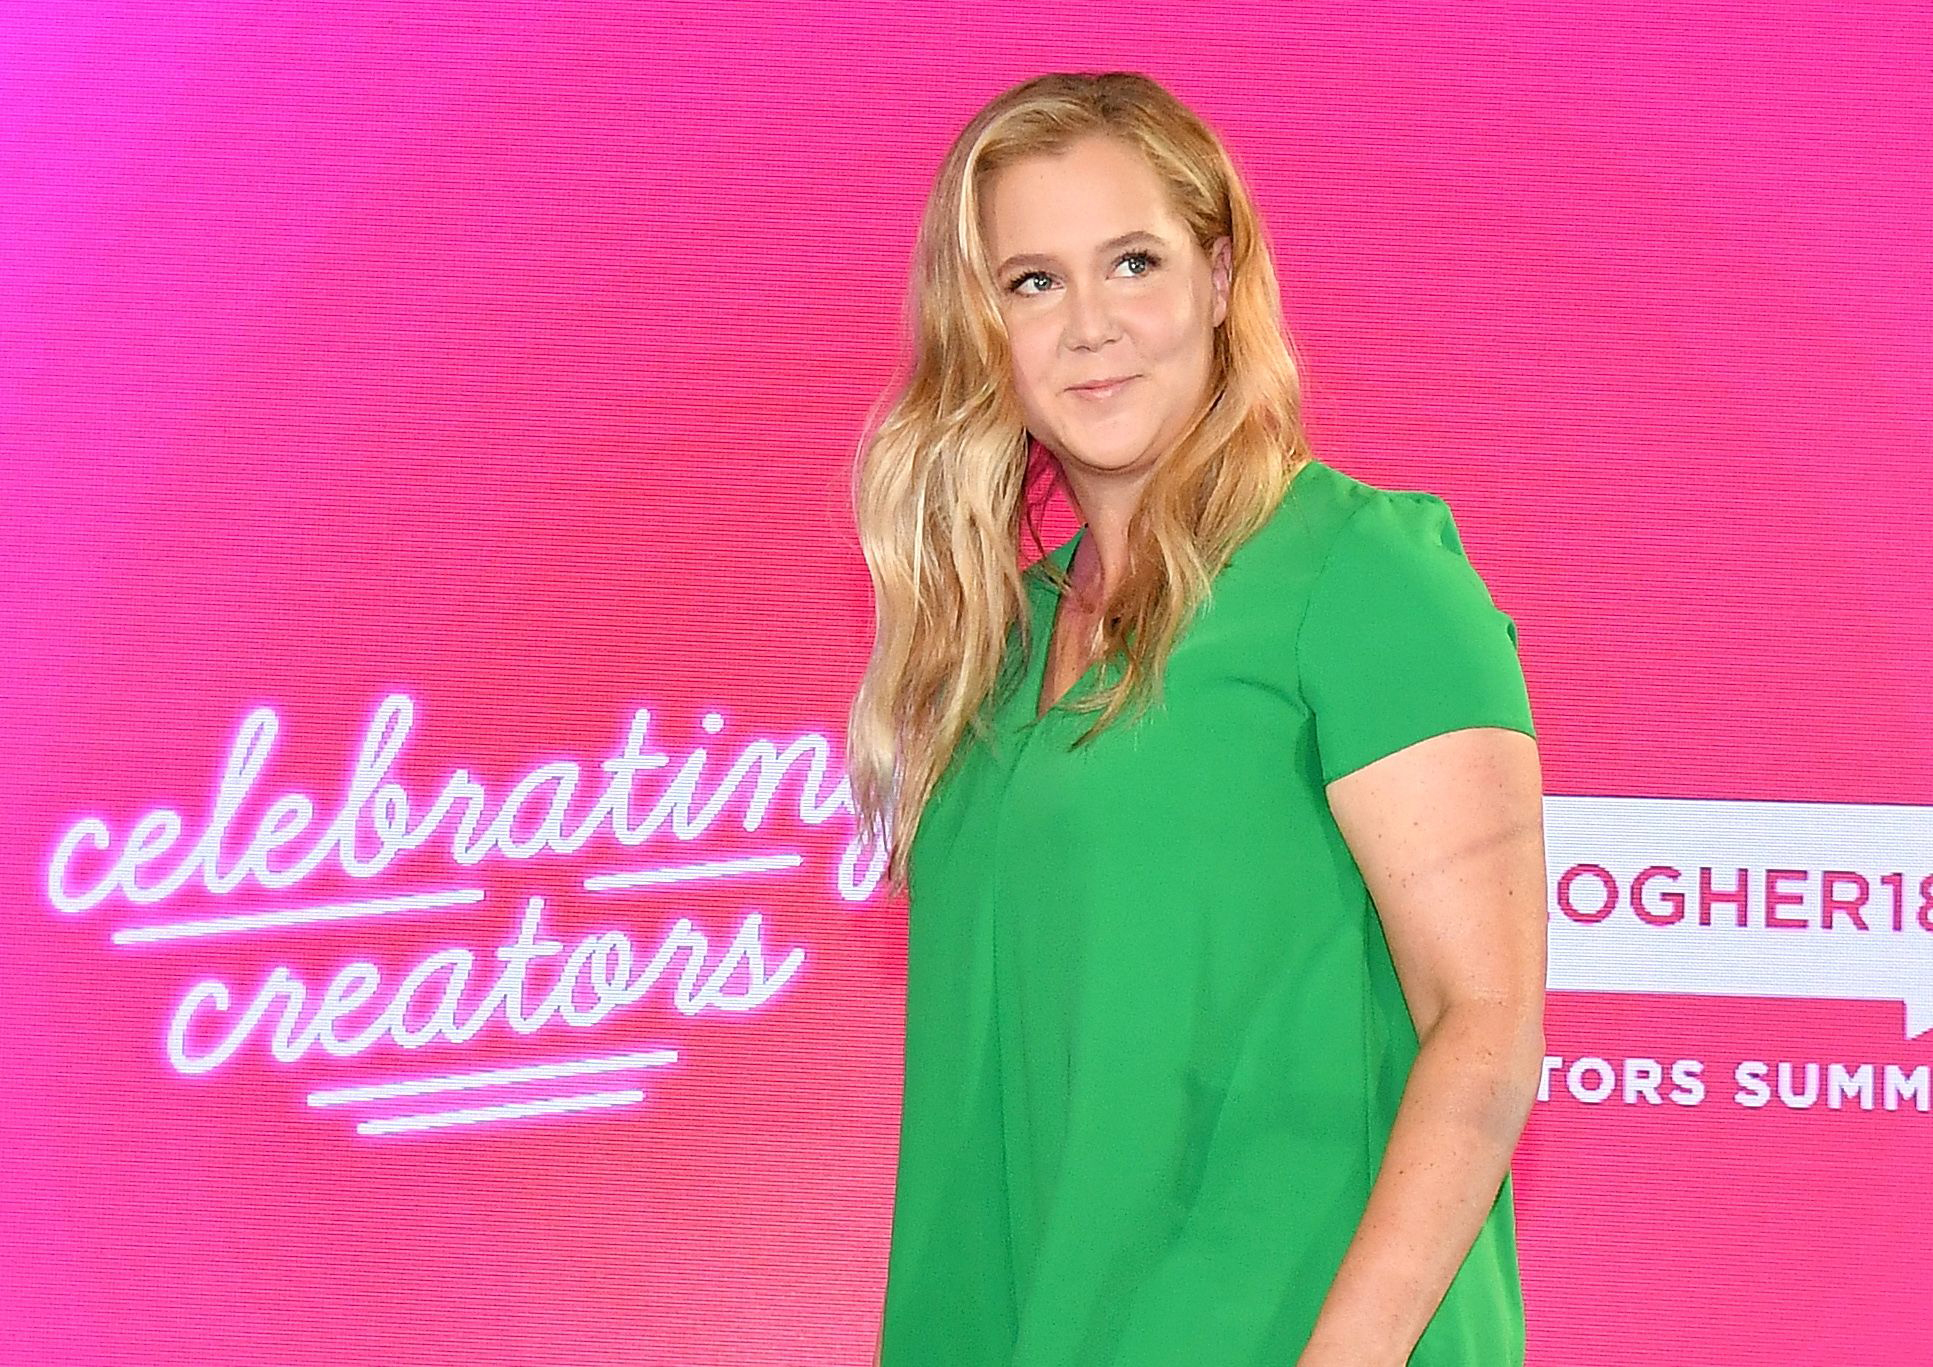 PHOTO: Amy Schumer walks onstage at the #BlogHer18 Creators Summit at Pier 17 on Aug. 8, 2018 in New York City.